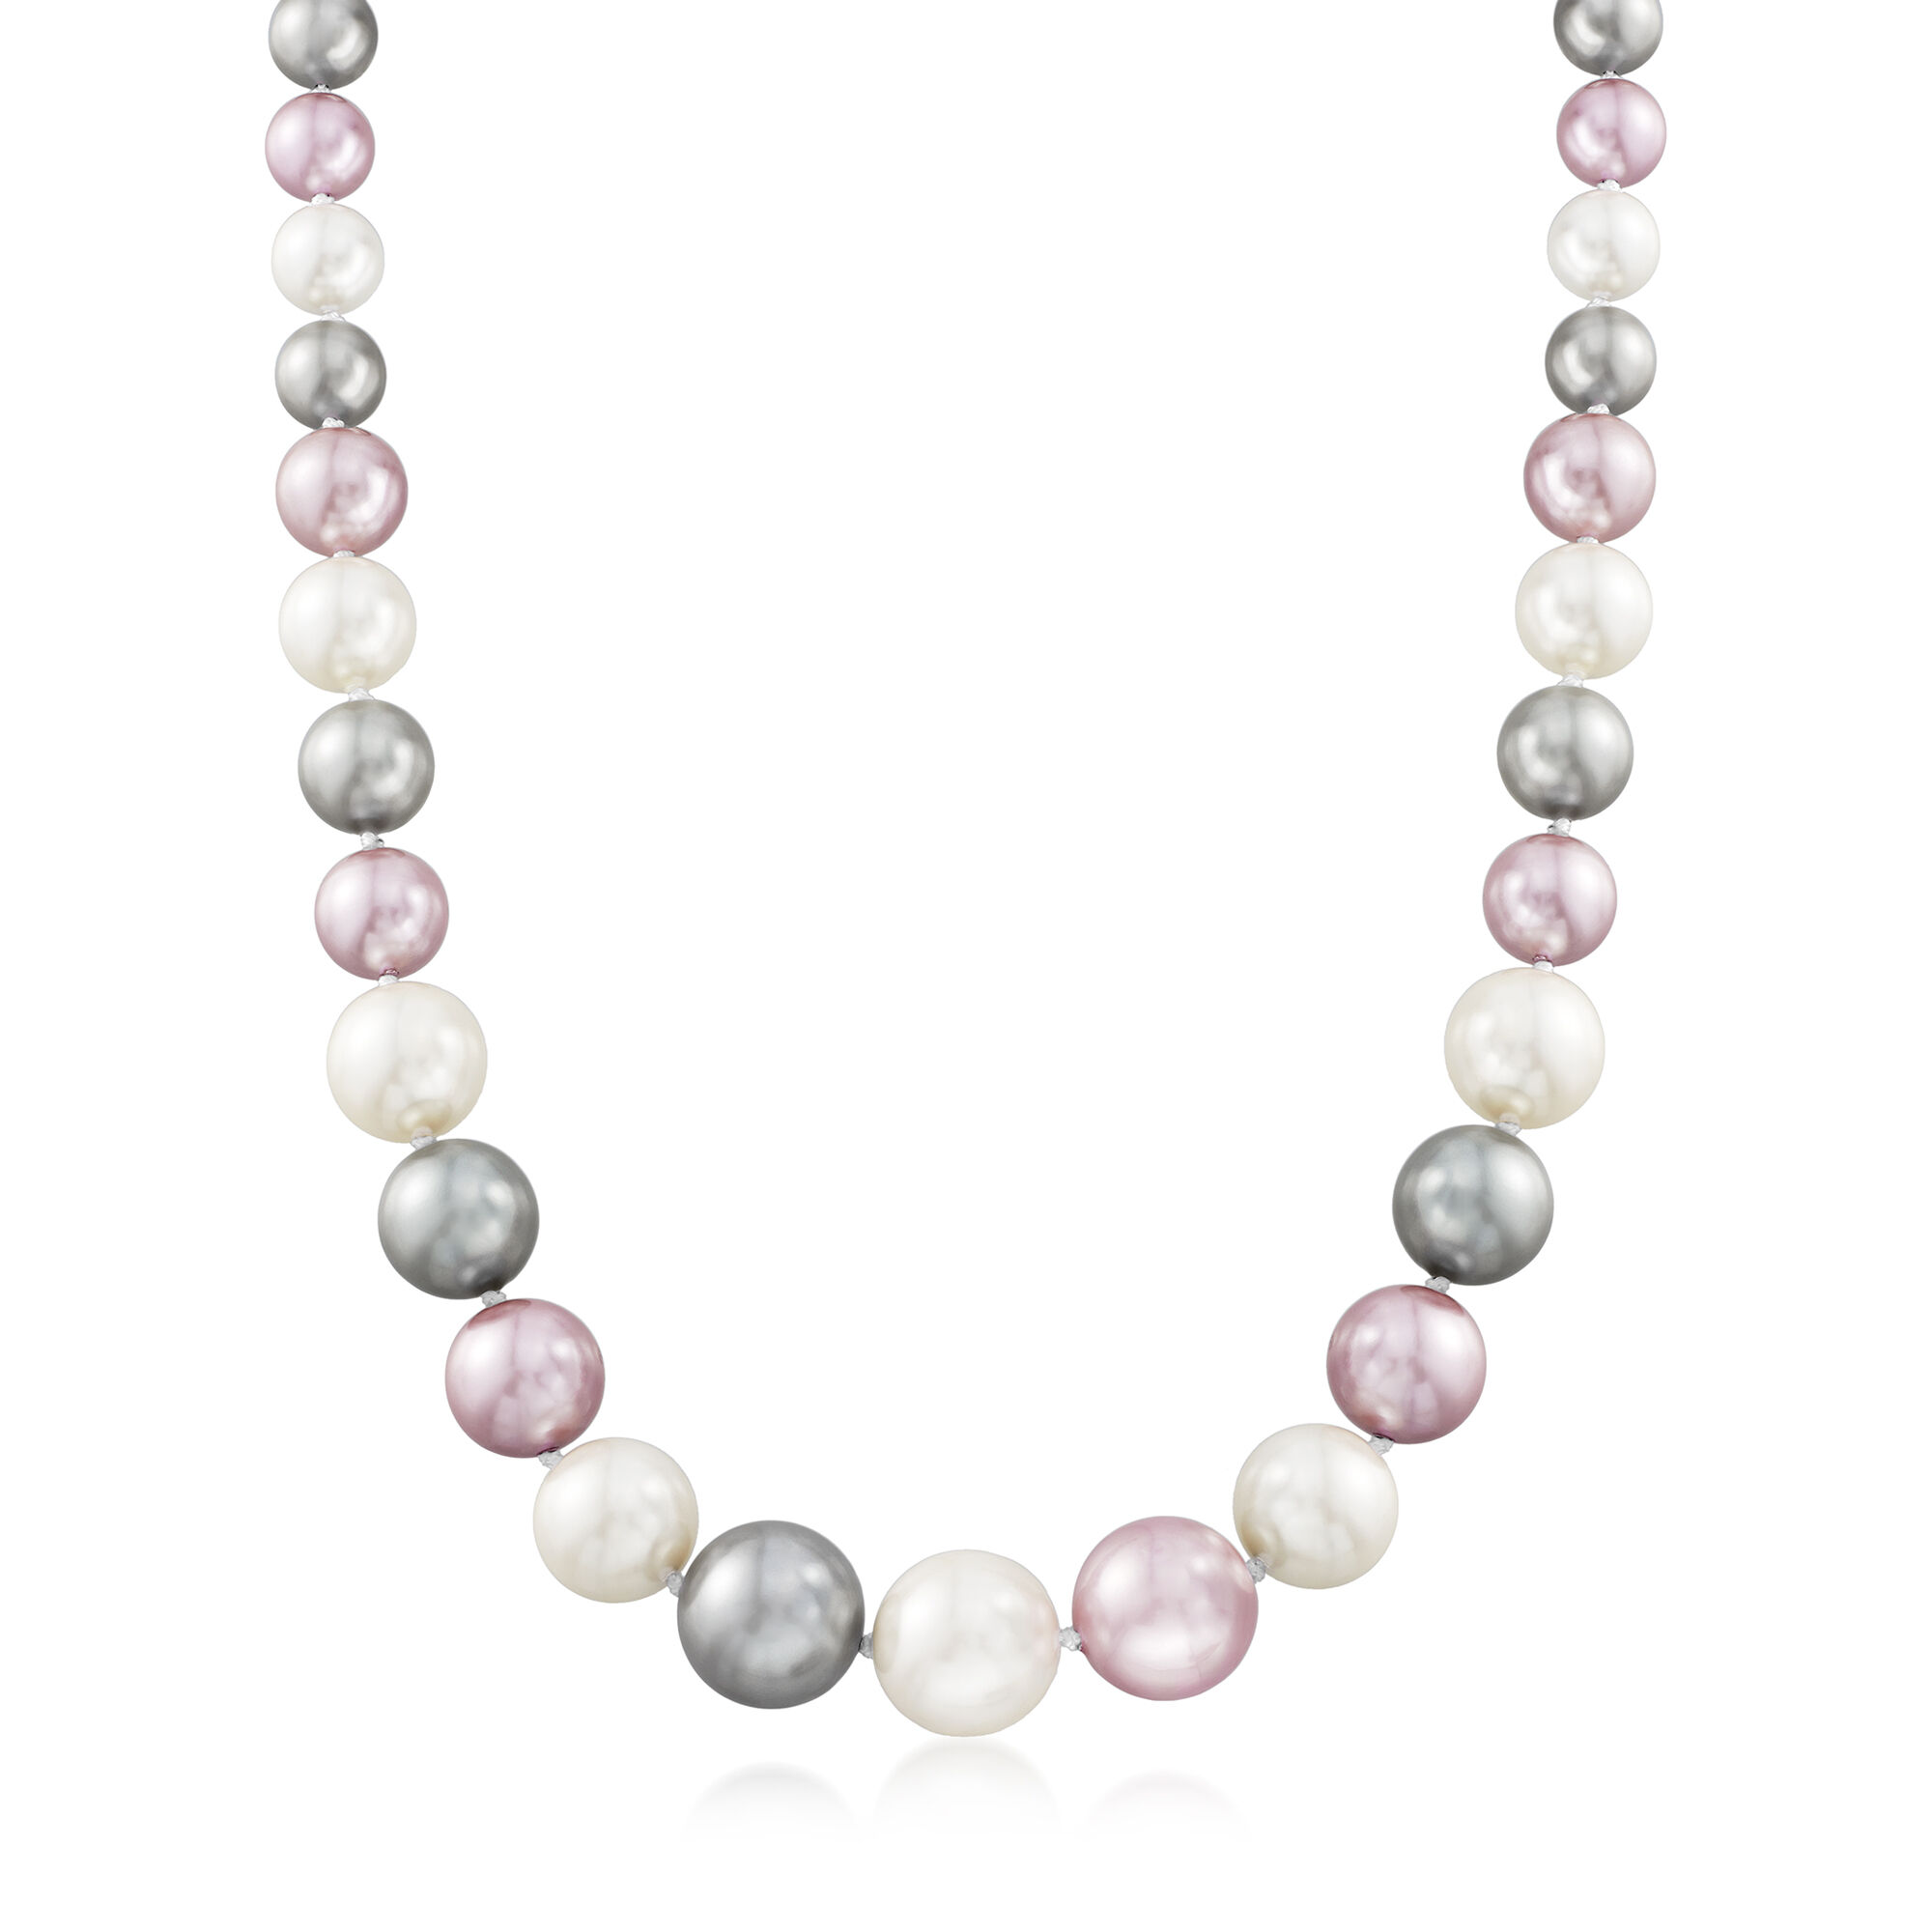 8-16mm Tri-Colored Shell Pearl Necklace with Sterling Silver 